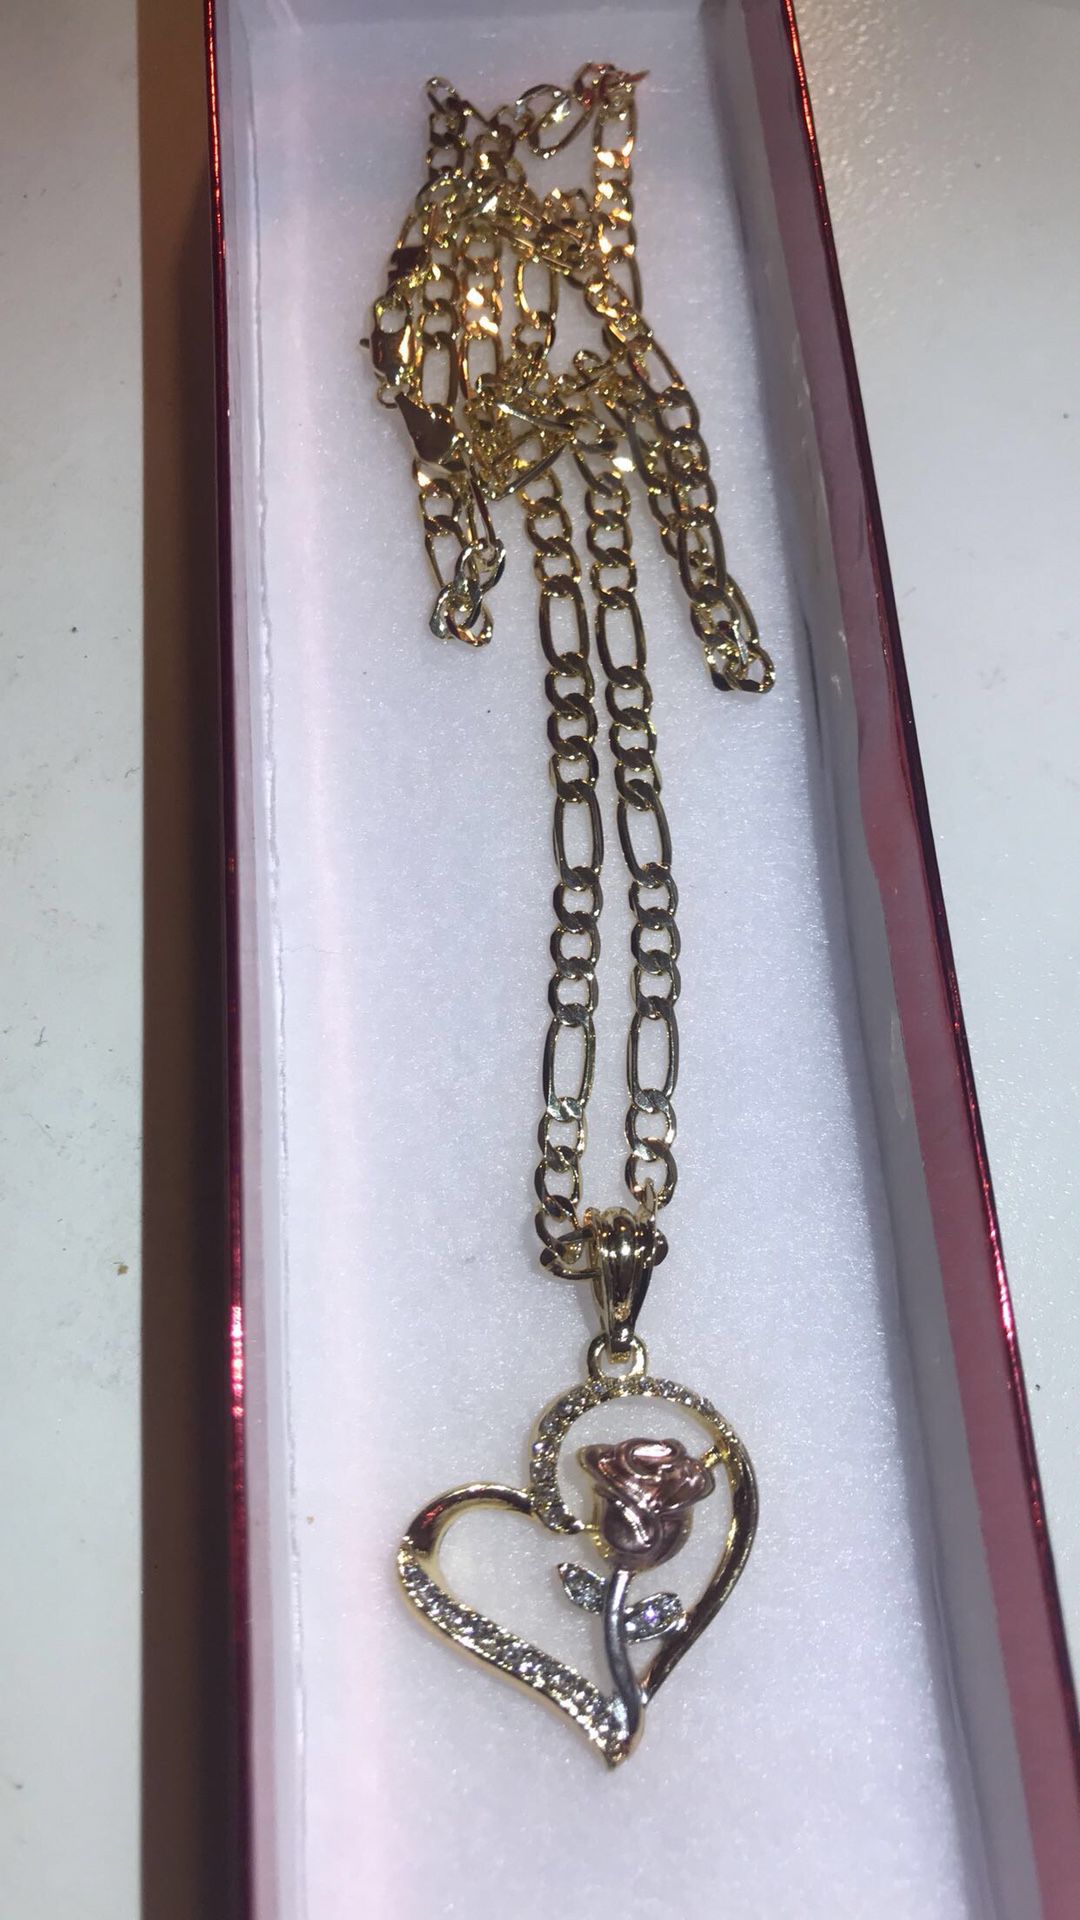 Chain with pendant